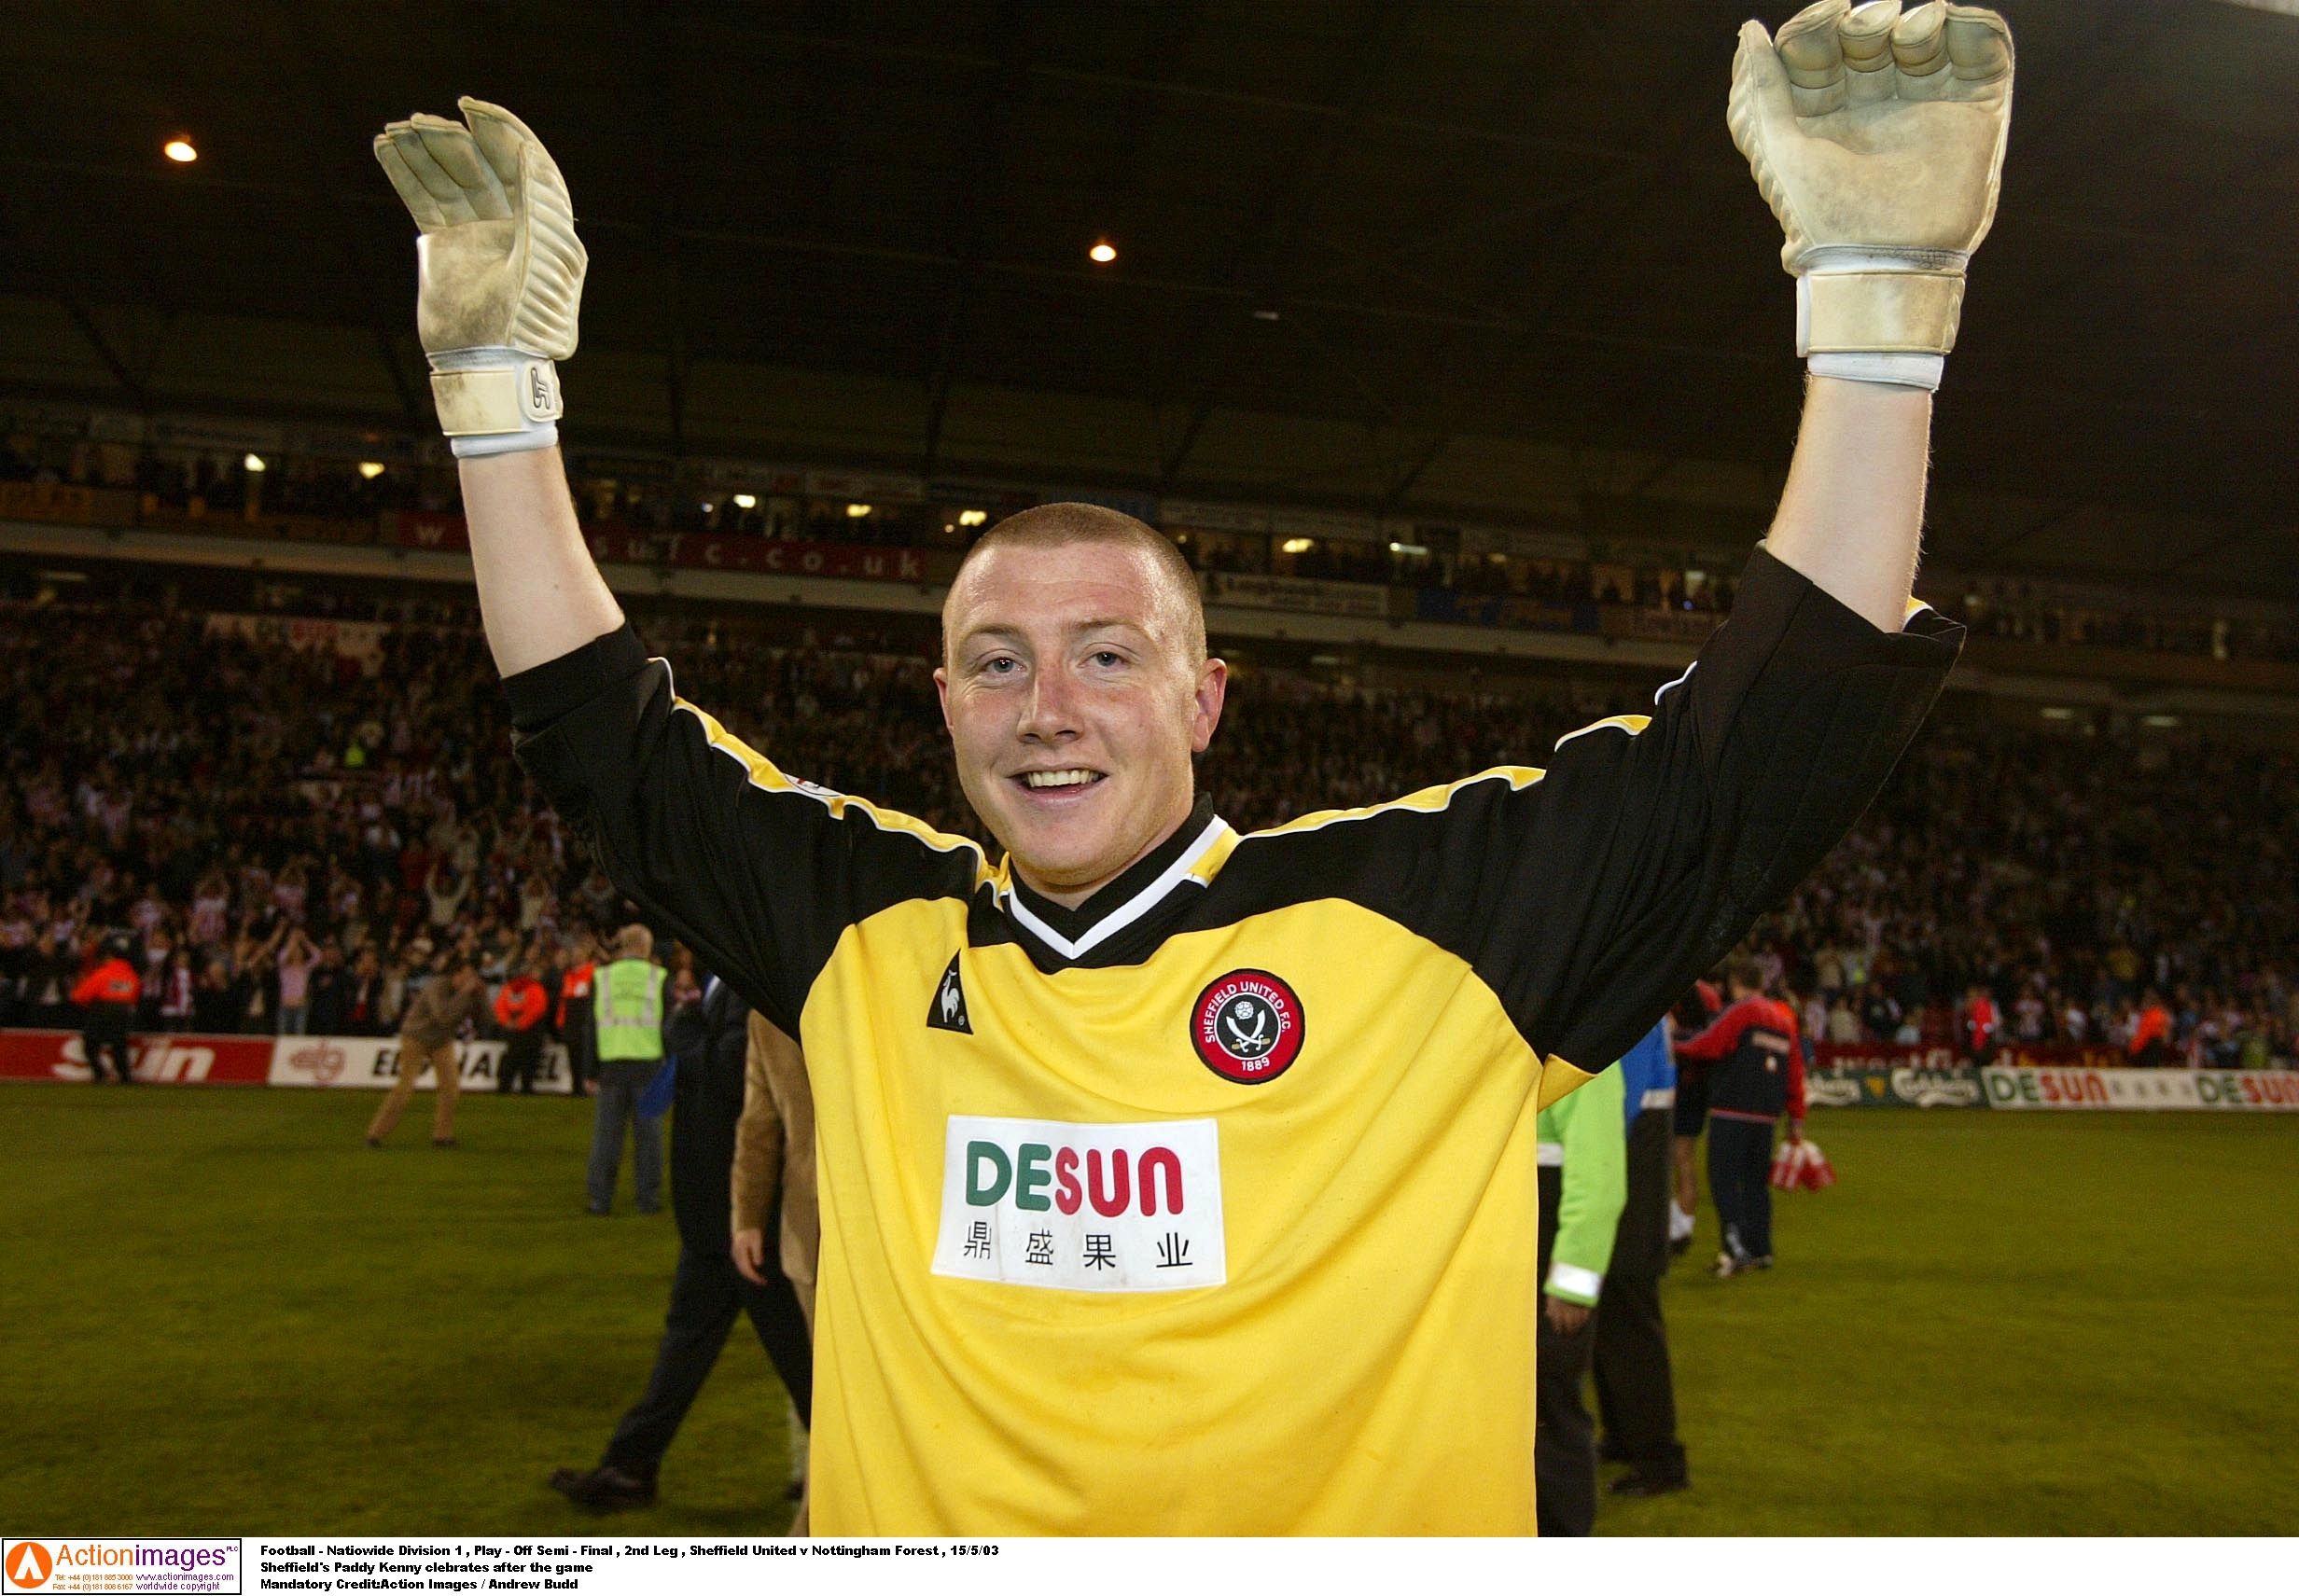 Football - Natiowide Division 1 , Play - Off Semi - Final , 2nd Leg , Sheffield United v Nottingham Forest , 15/5/03 
Sheffield's Paddy Kenny celebrates after the game 
Mandatory Credit:Action Images / Andrew Budd